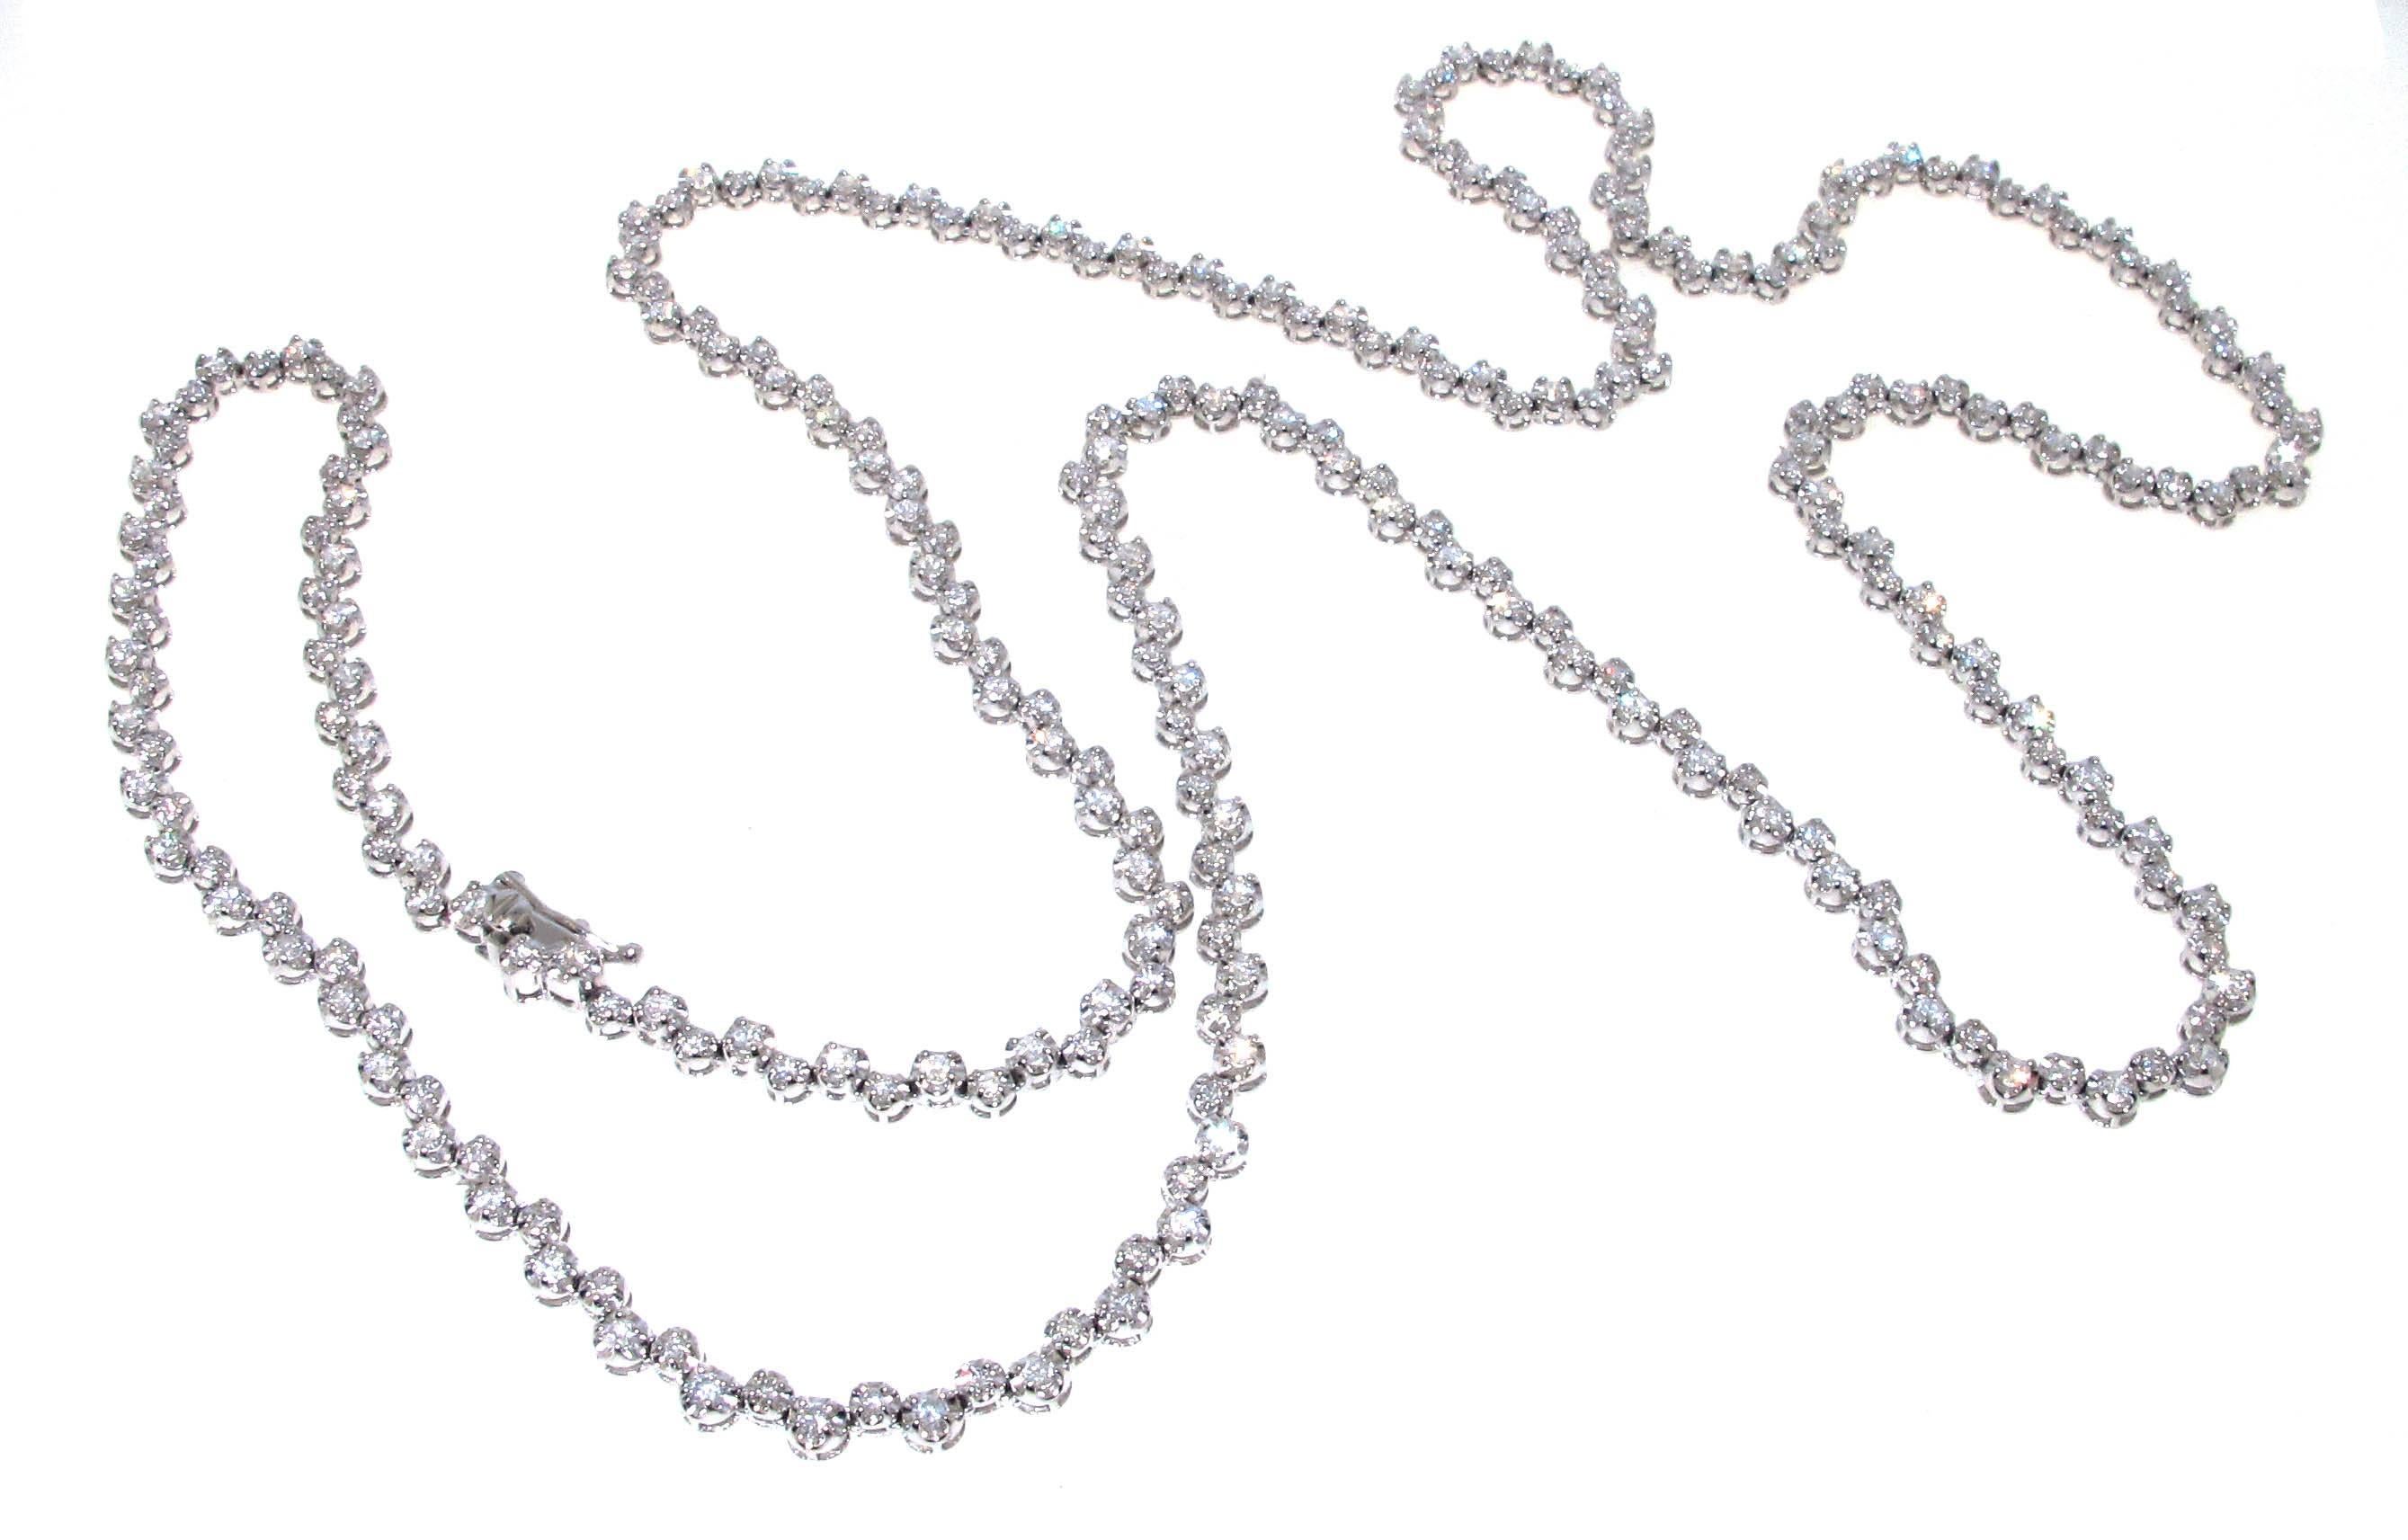 Modern 18kt White Gold side by side diamond chain. Over 6 carats of diamonds! 31 inches